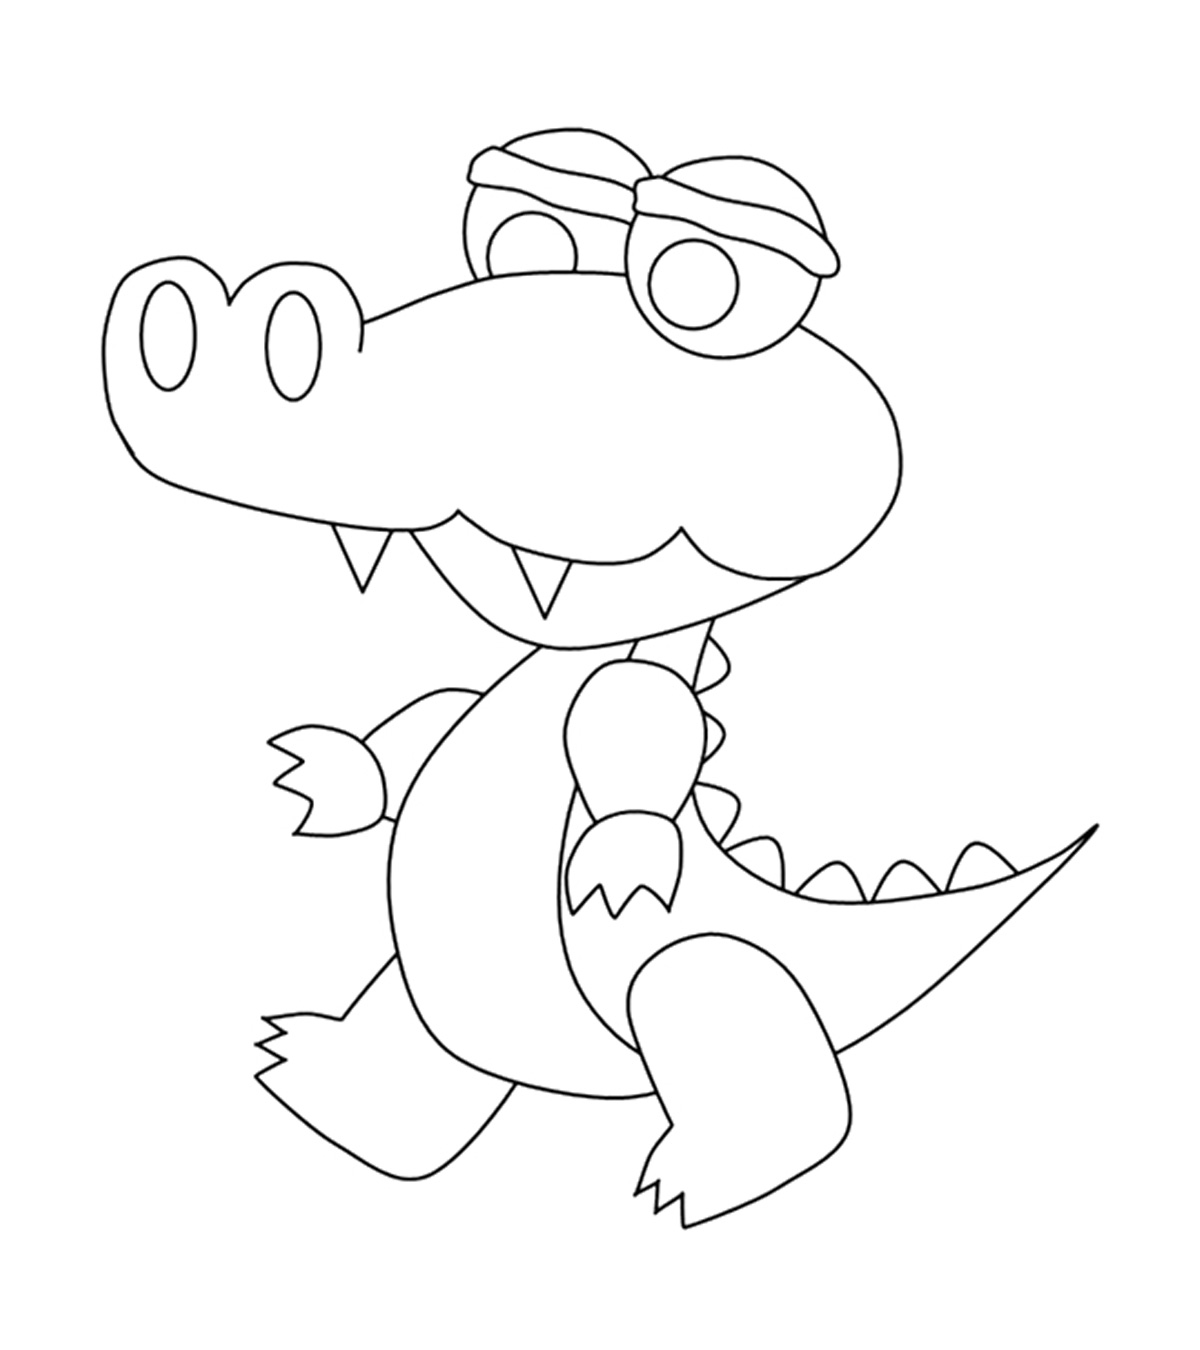 Top 10 Crocodile Coloring Pages For Your Toddler_image